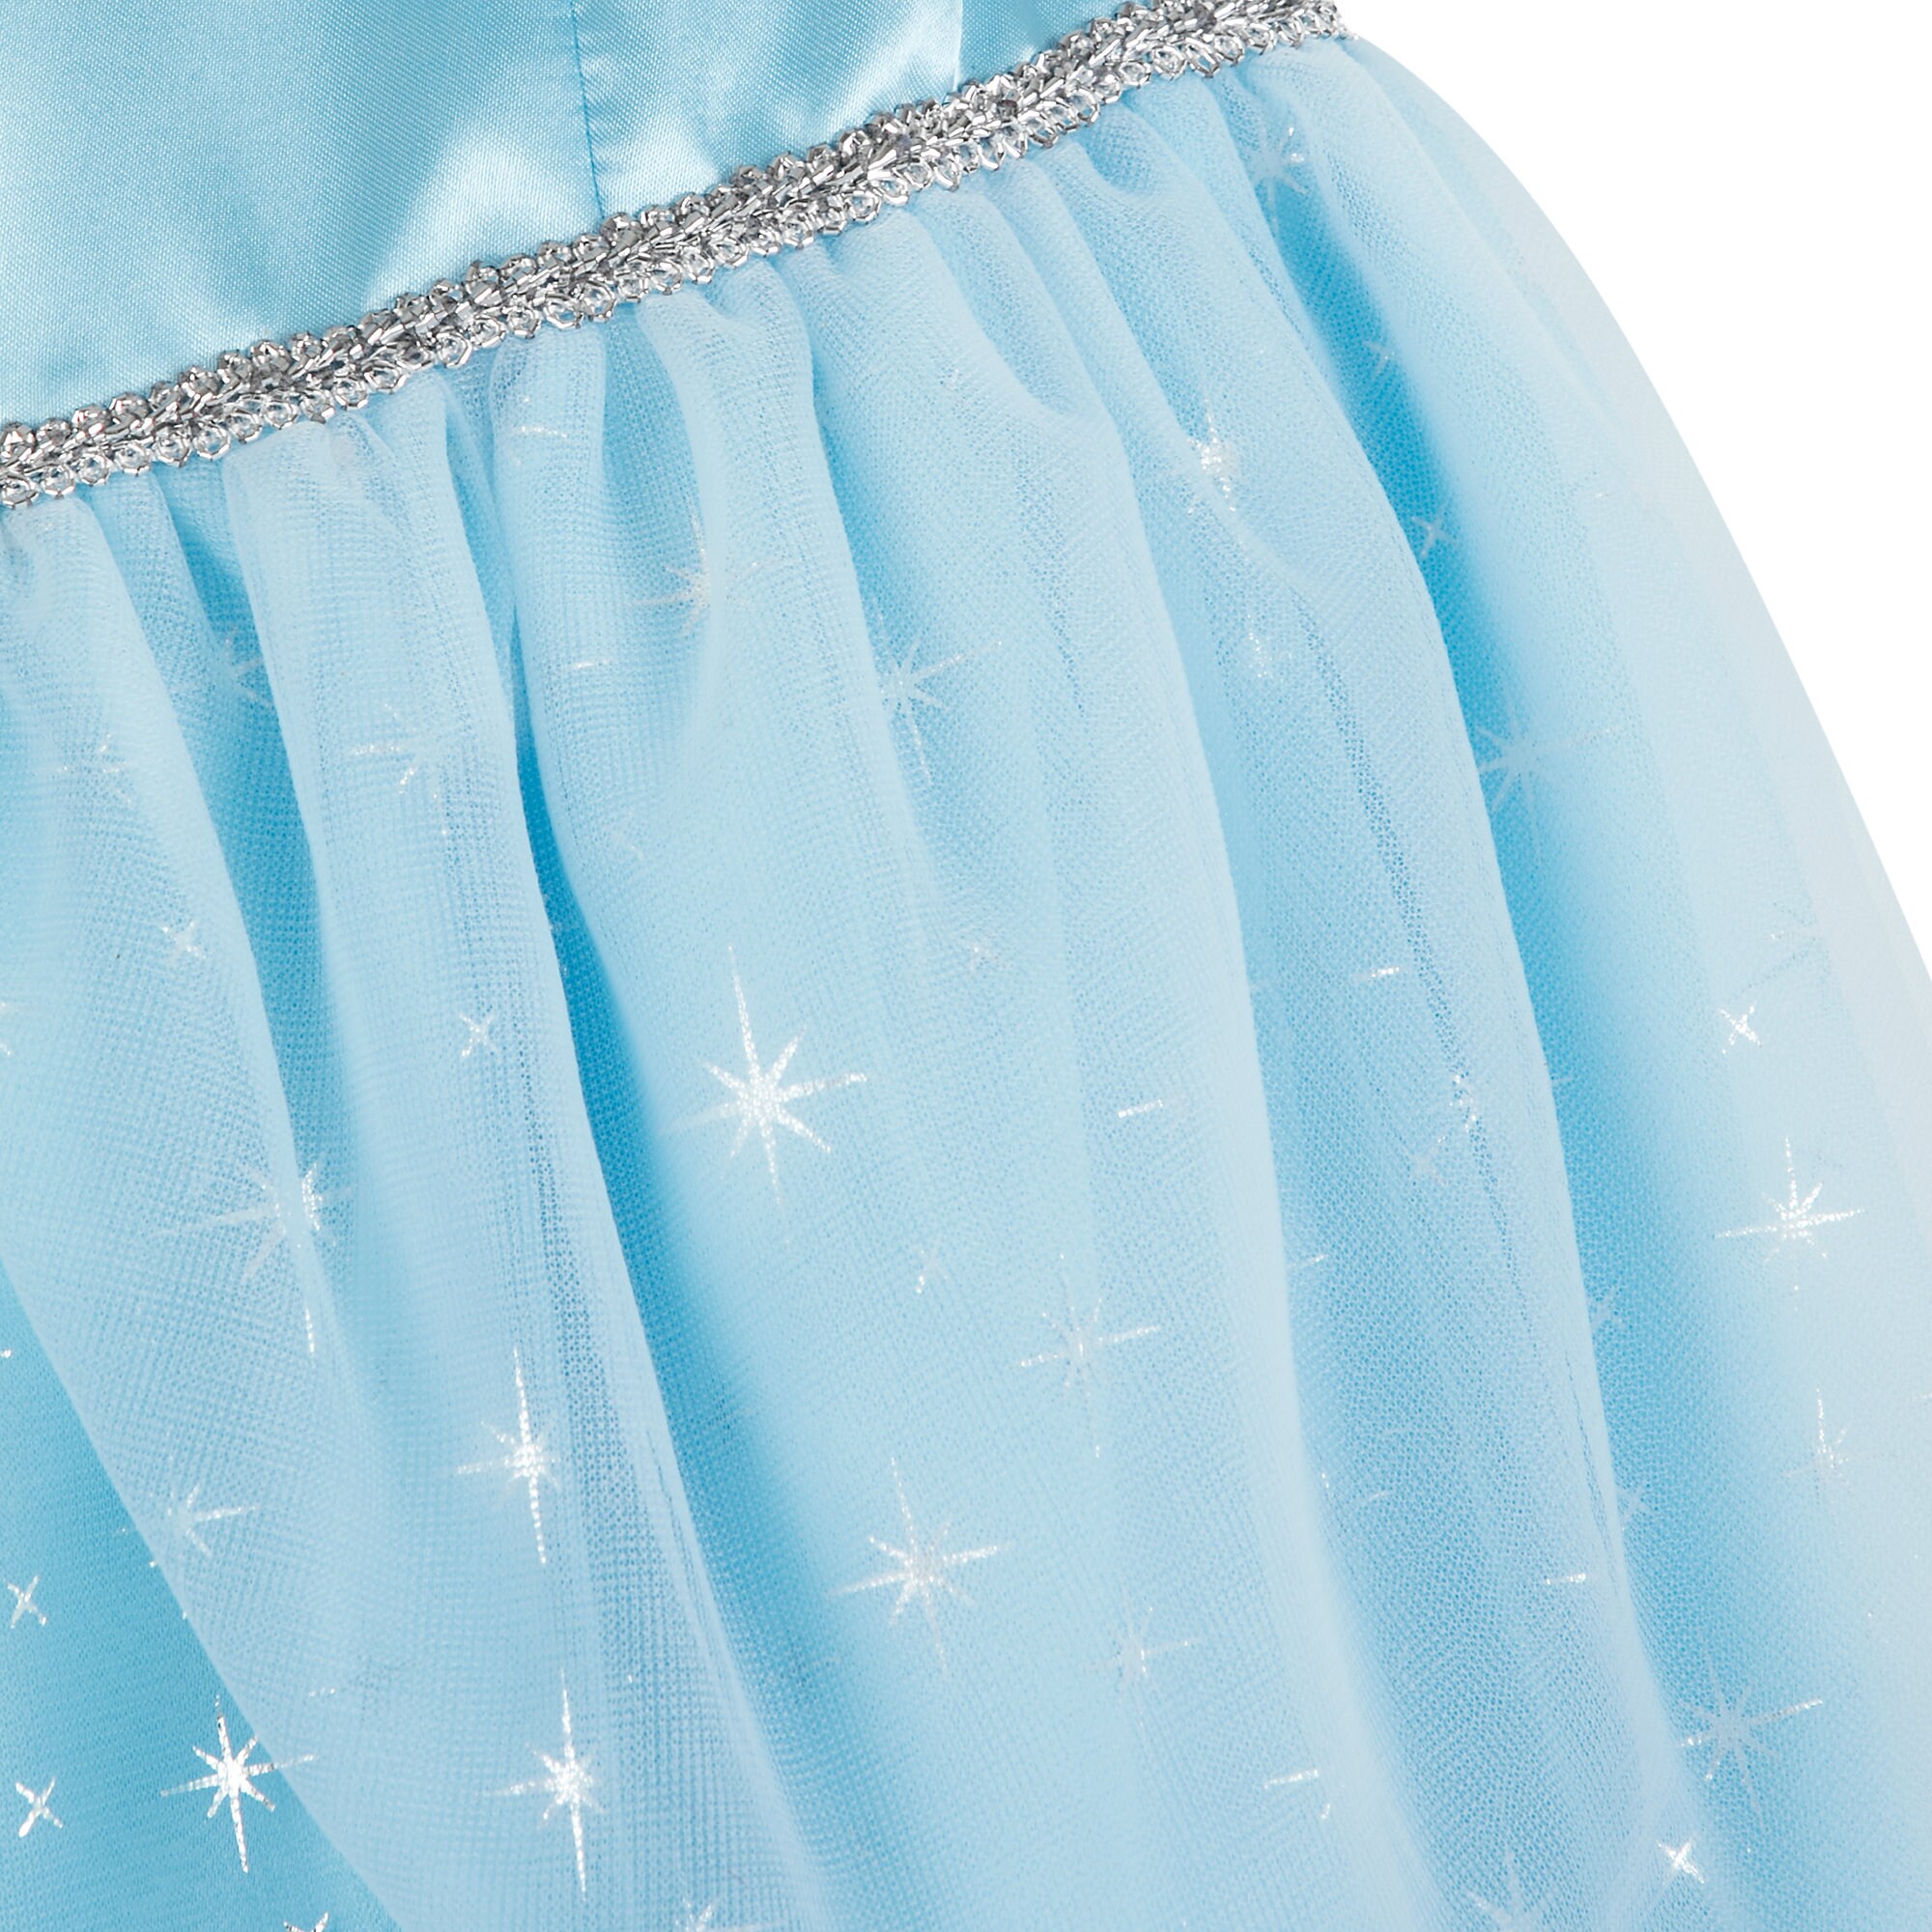 Cinderella Sleep Gown for Girls now available online – Dis Merchandise News